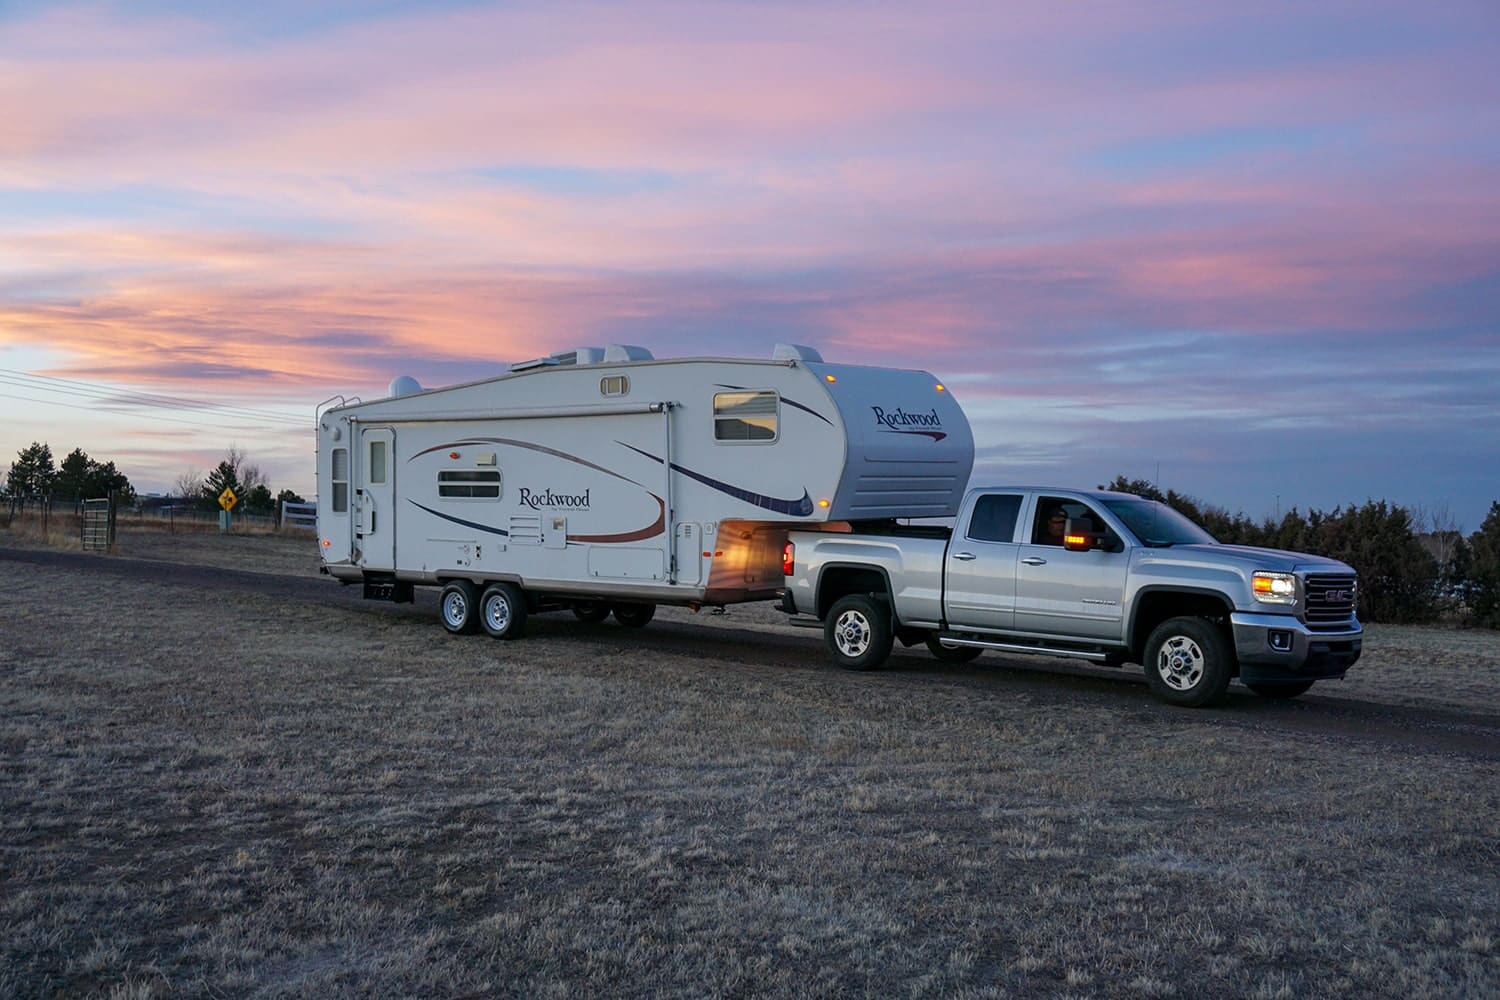 Do You Know Why It's Called A “Fifth Wheel” RV? - RV Talk How Much Does It Cost To Move A Fifth Wheel